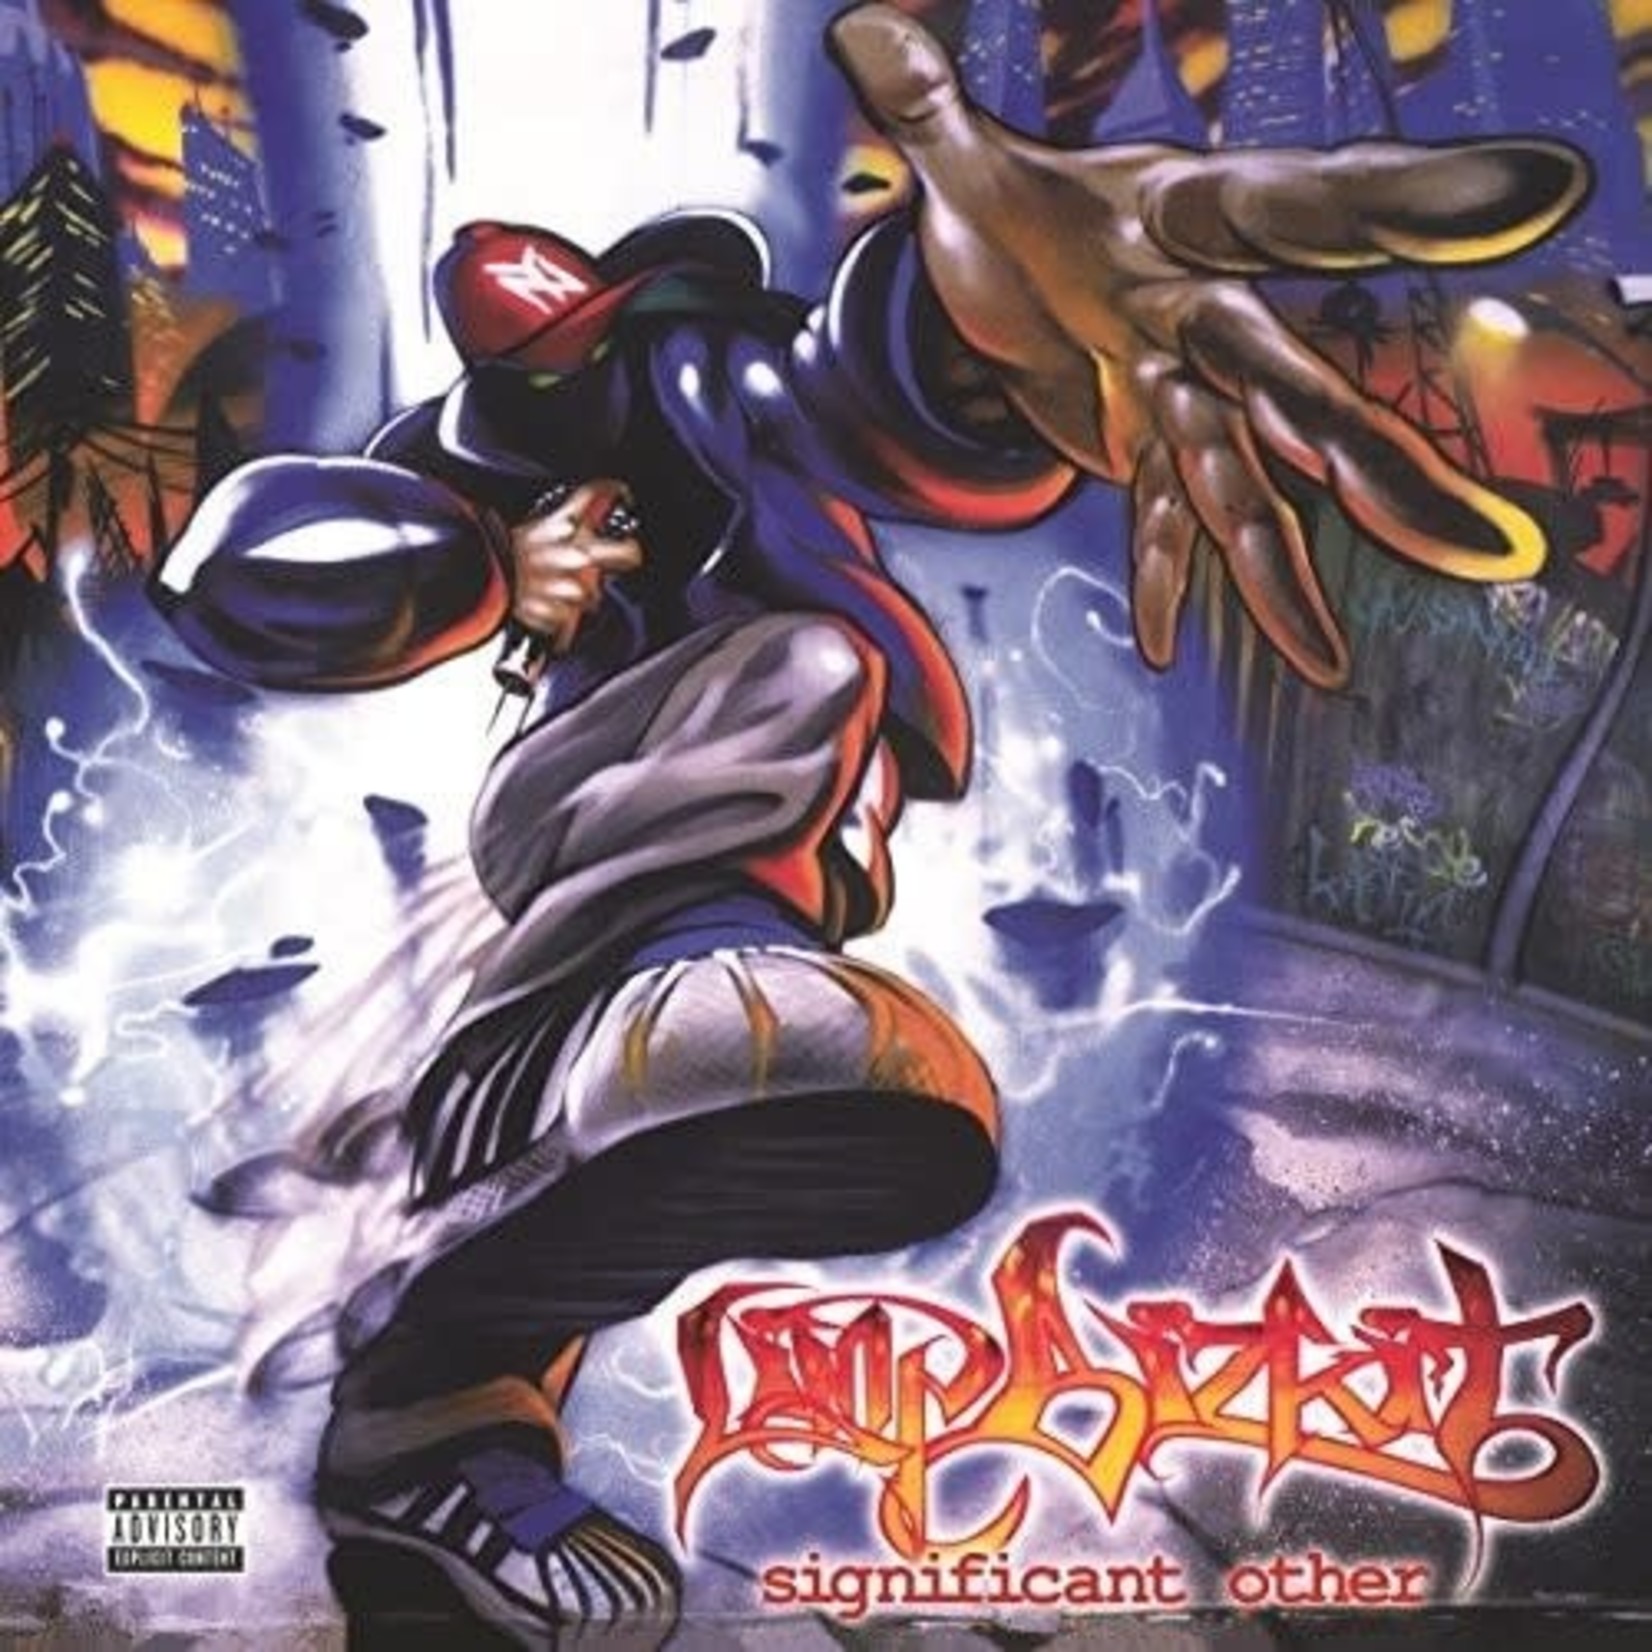 Limp Bizkit - Significant Other [USED CD]